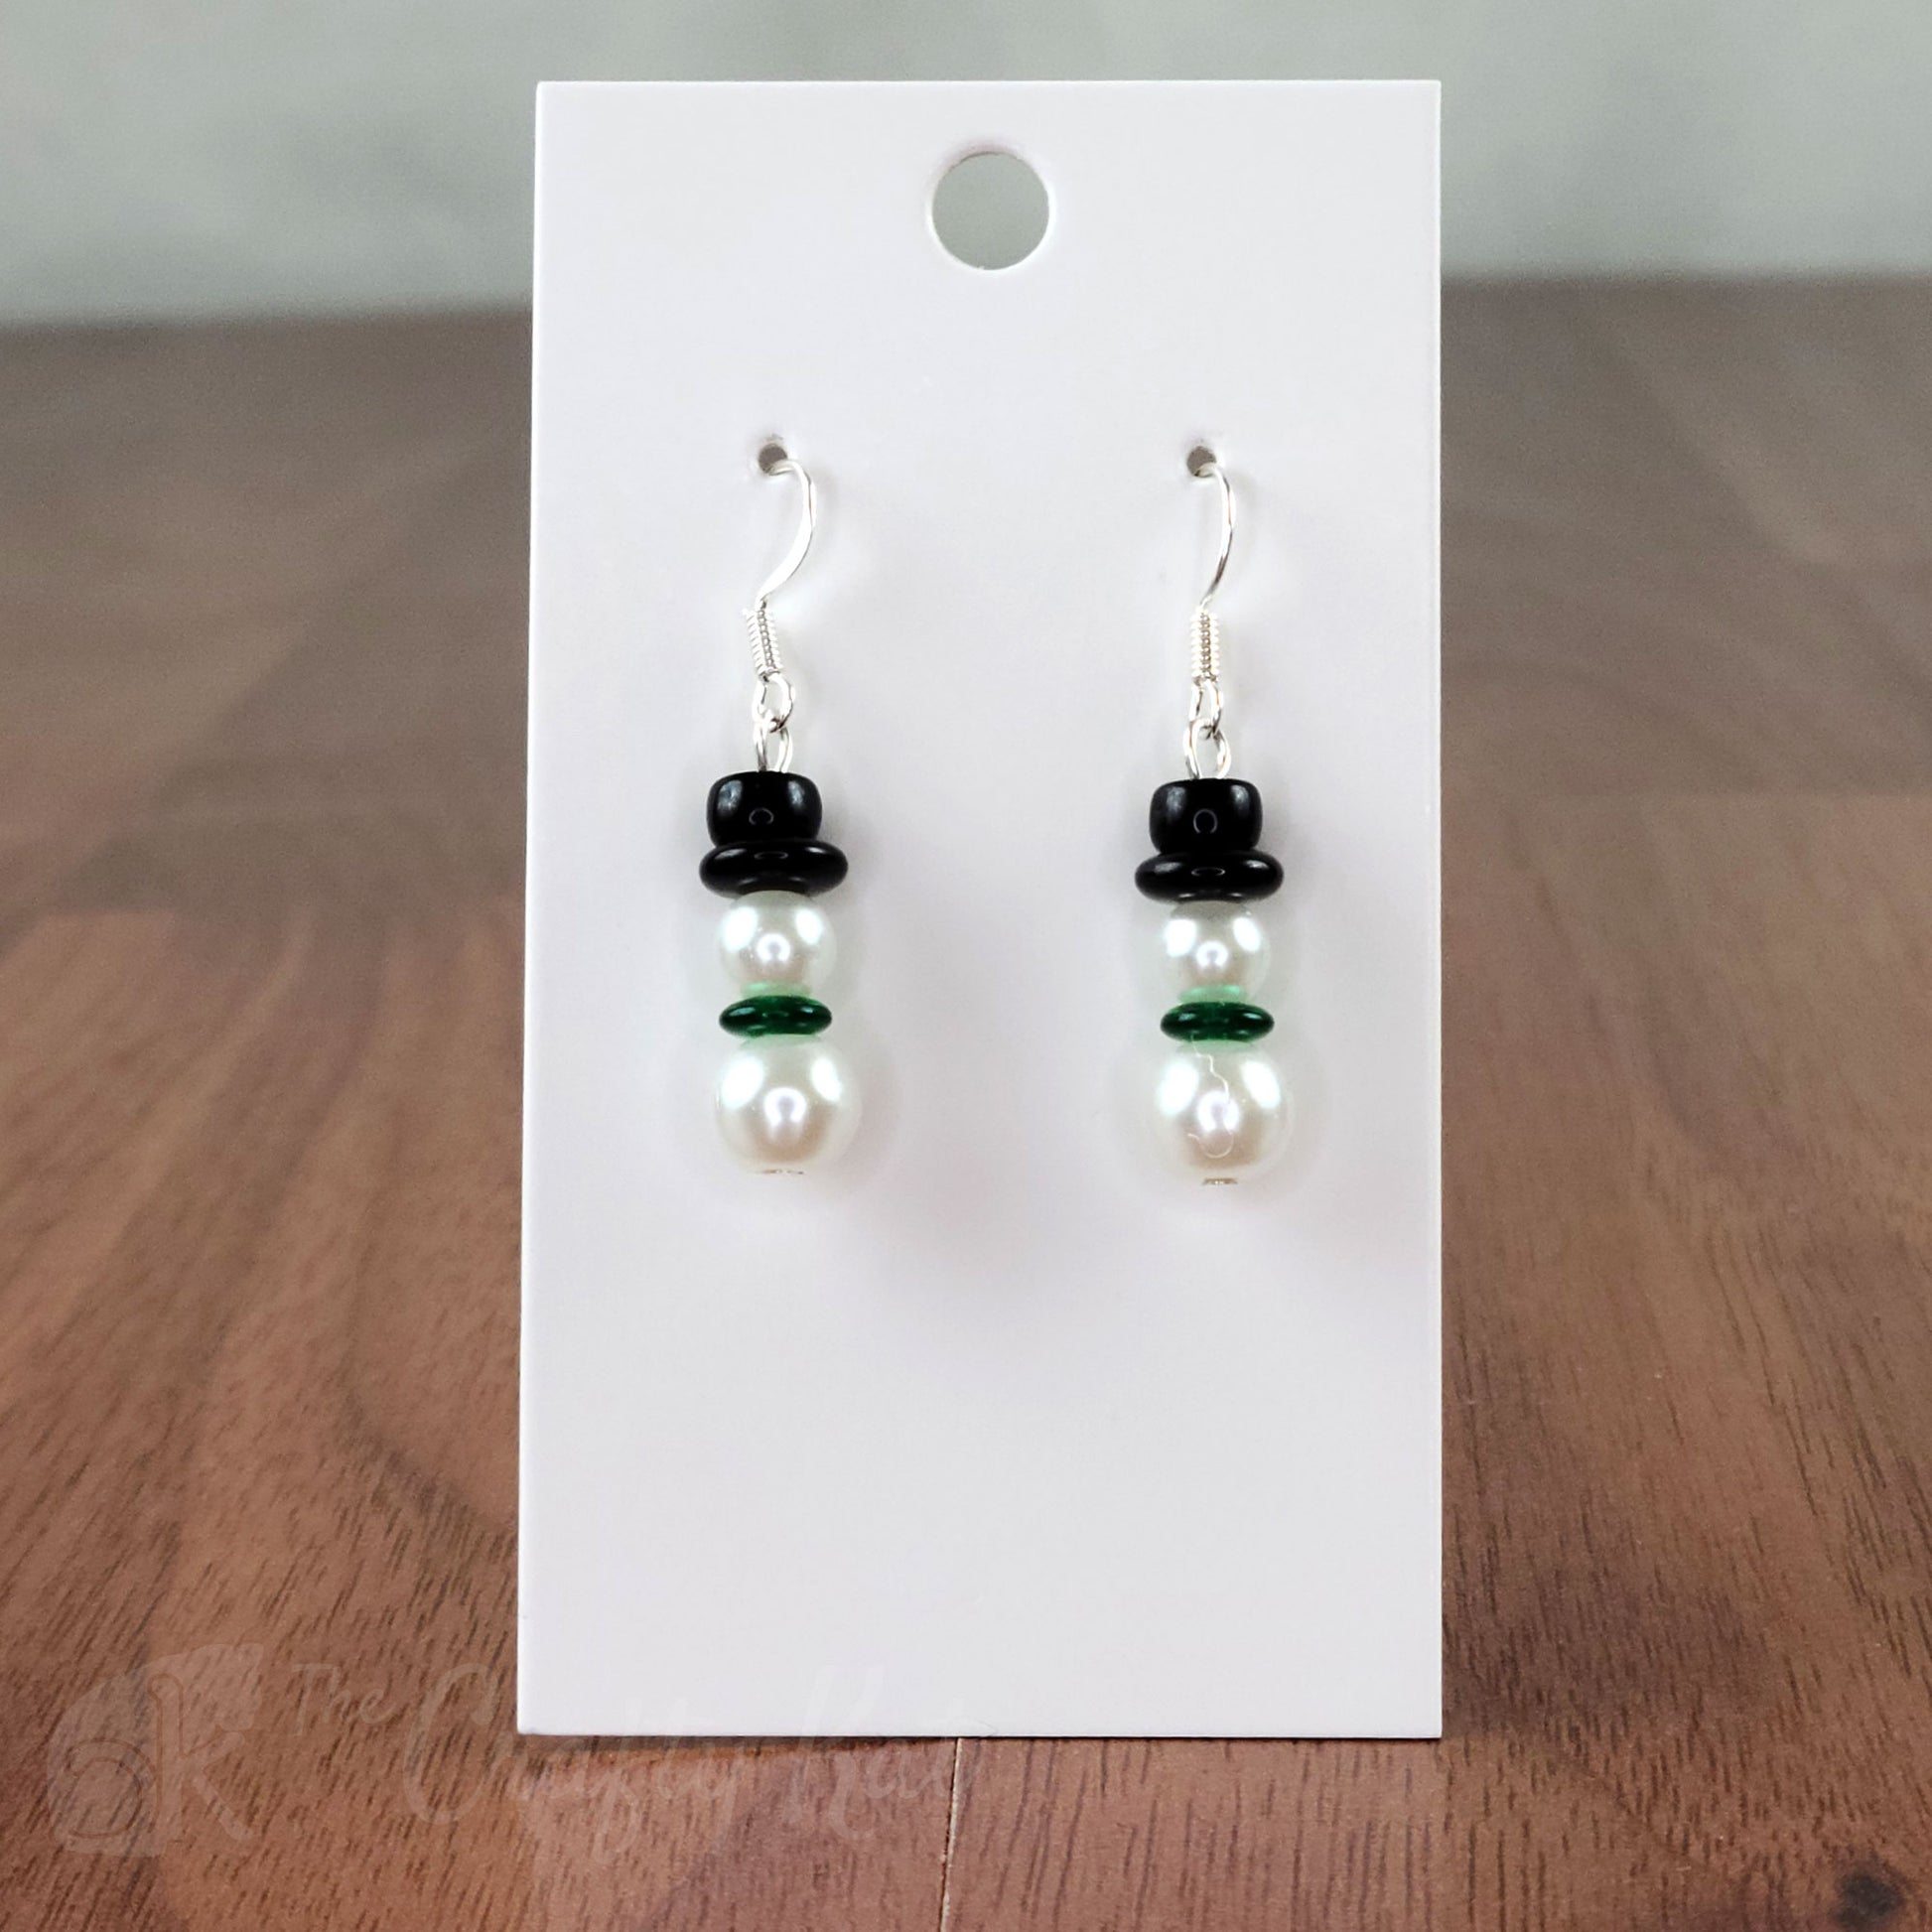 A pair of earring drops made of glass pearls and pressed glass beads, each drop forming the shape of a snowman with a green scarf and black top hat.